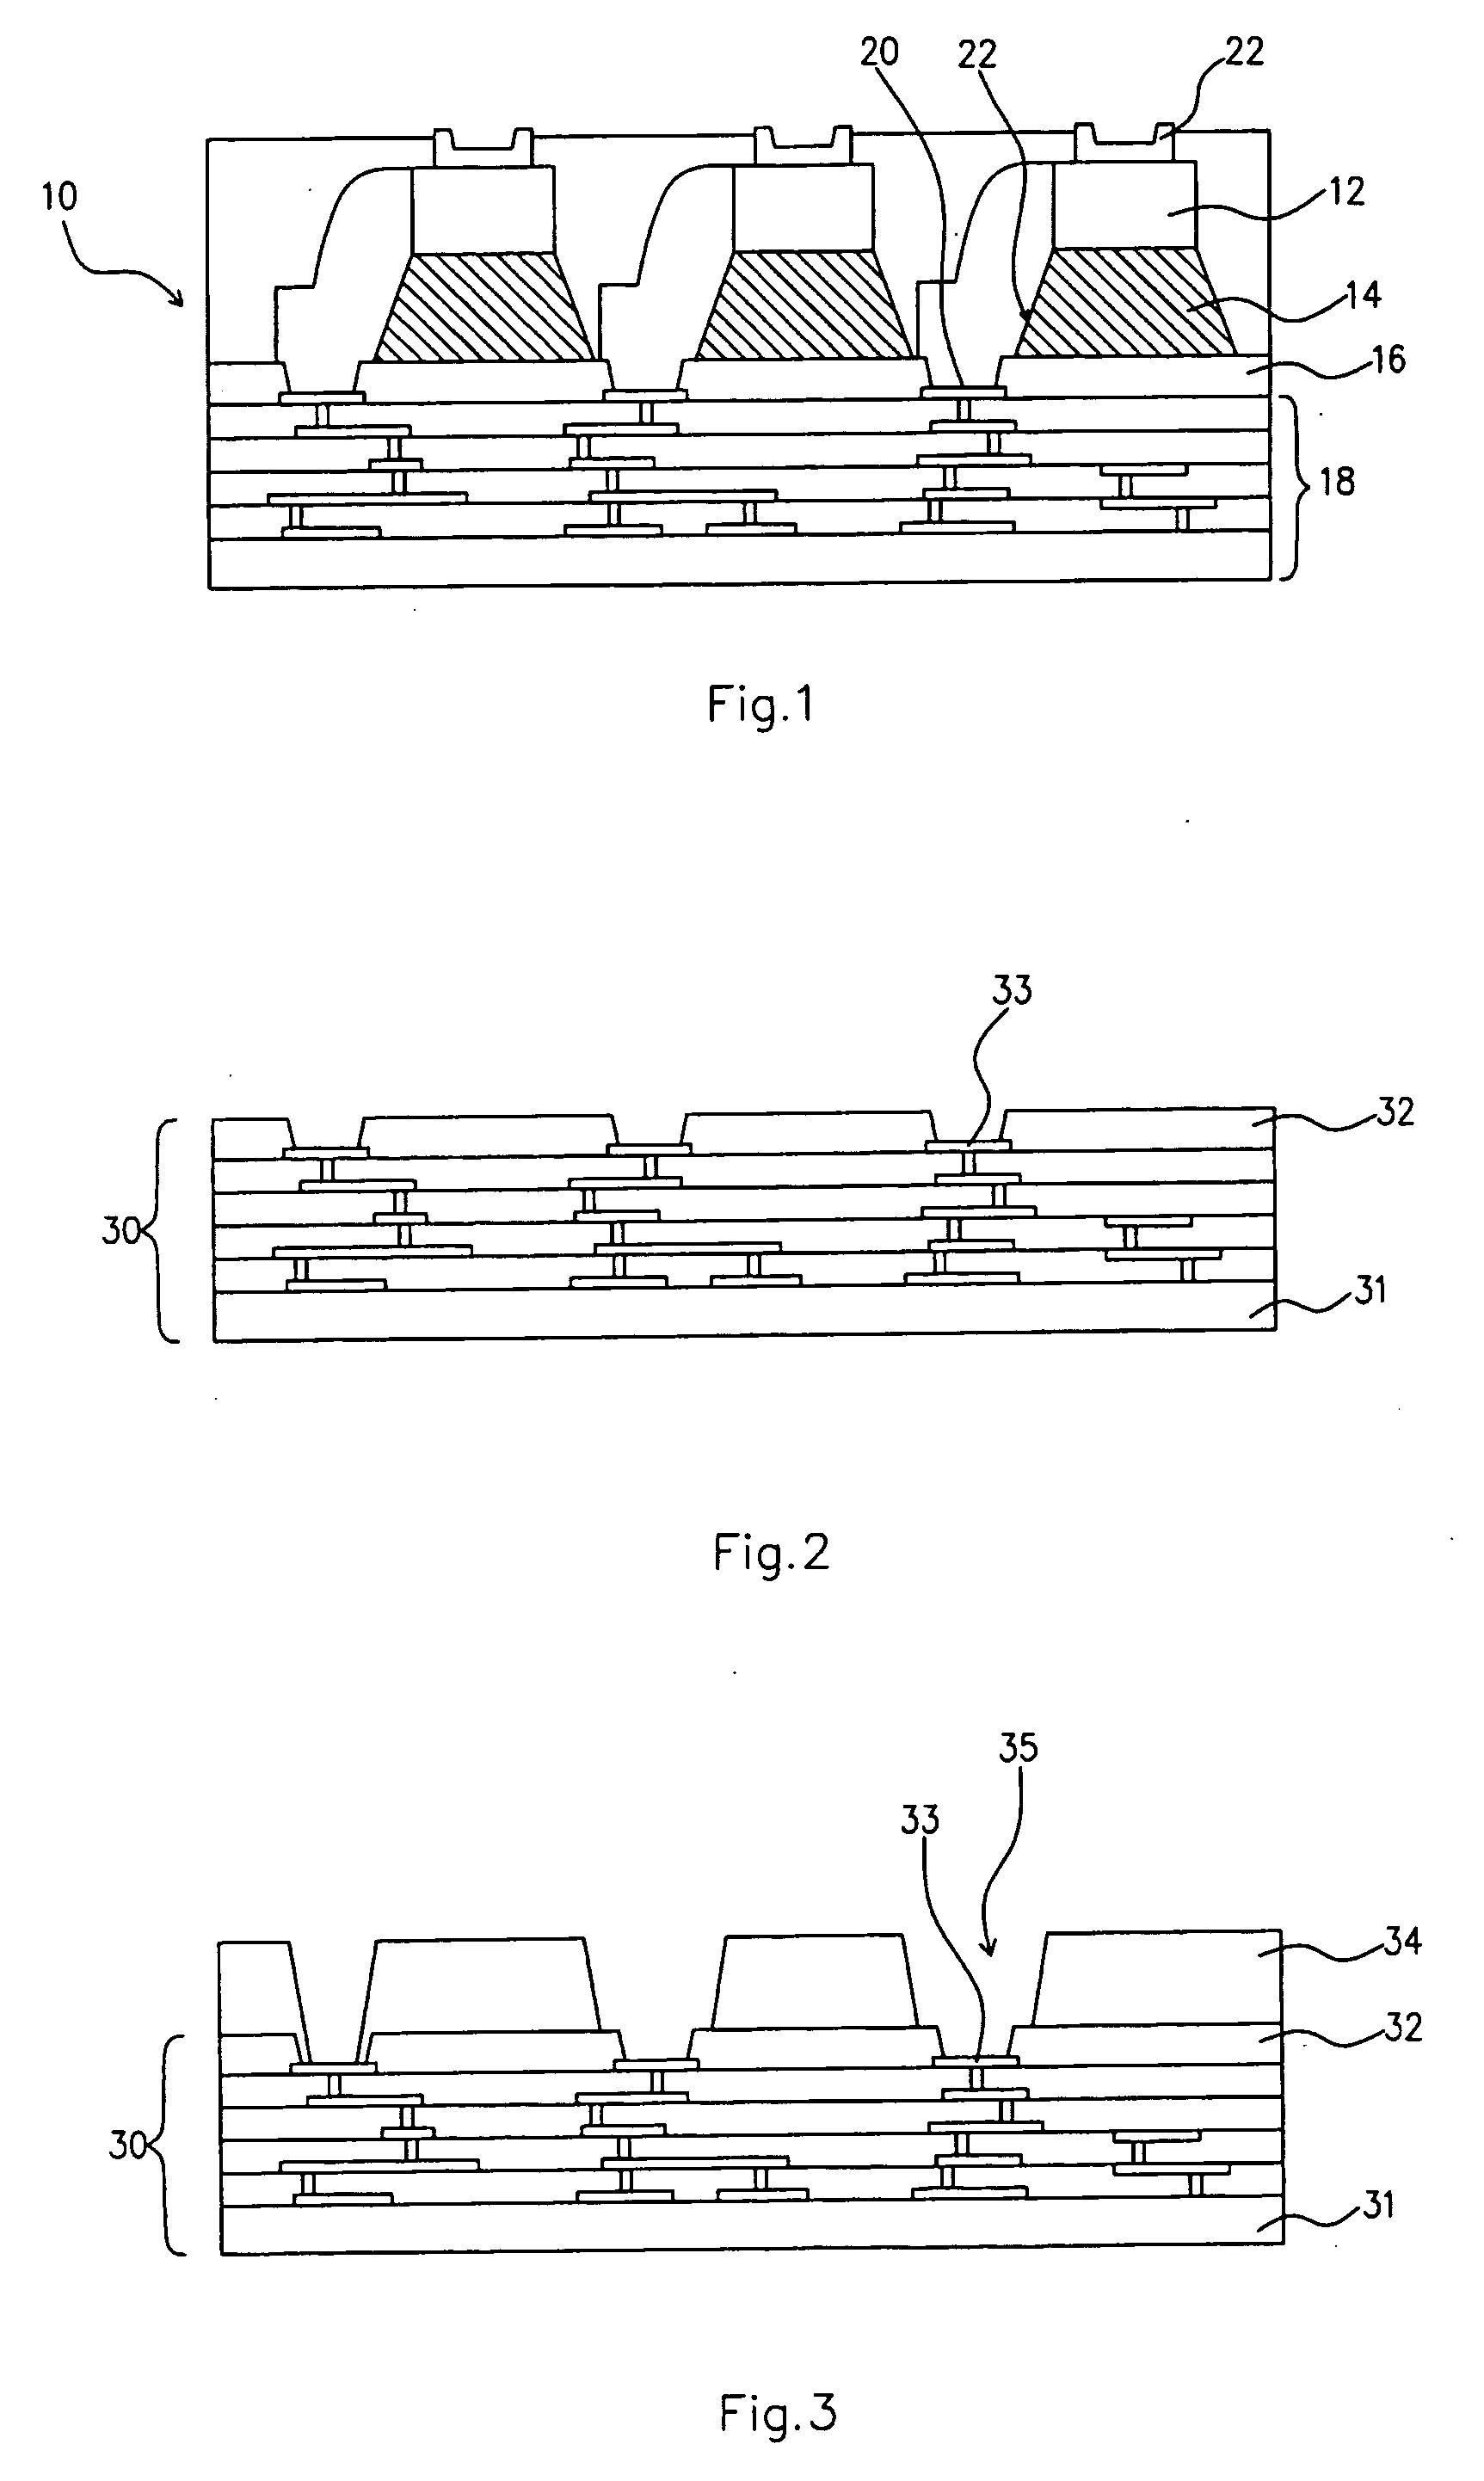 Post passivation structure for a semiconductor device and packaging process for same